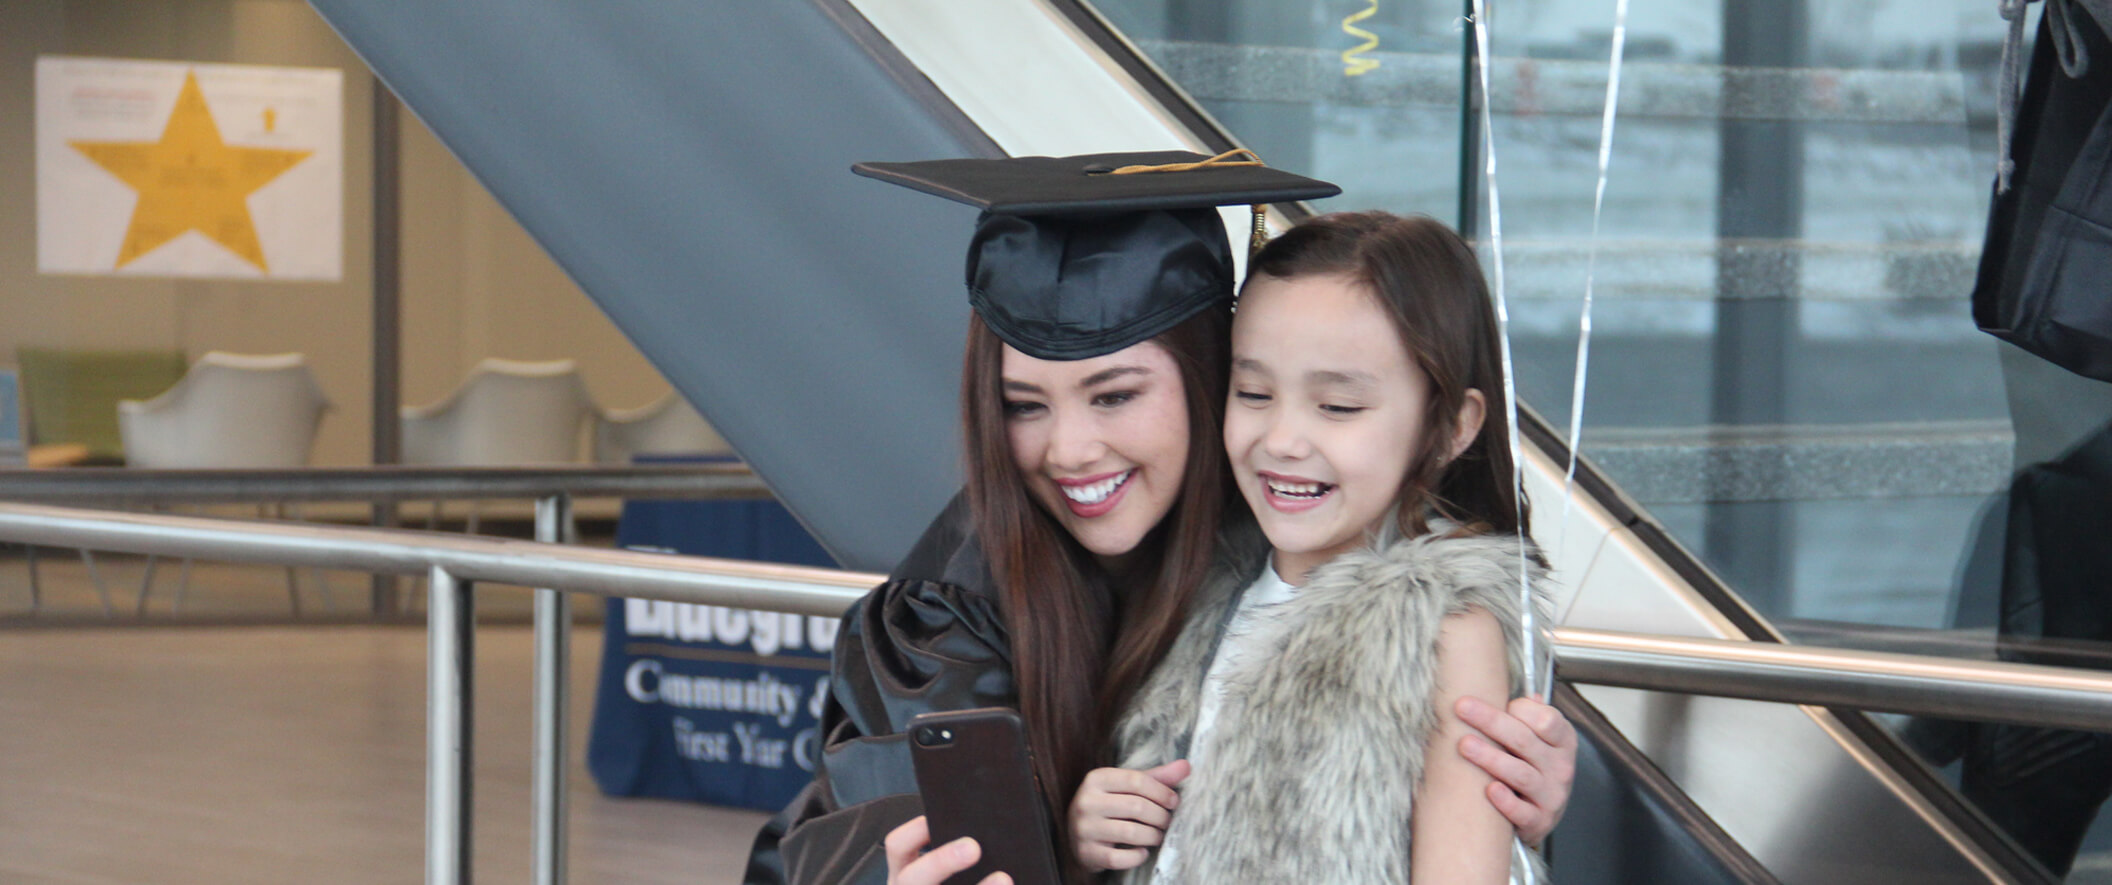 mom in grad outfit taking selfie with daughter